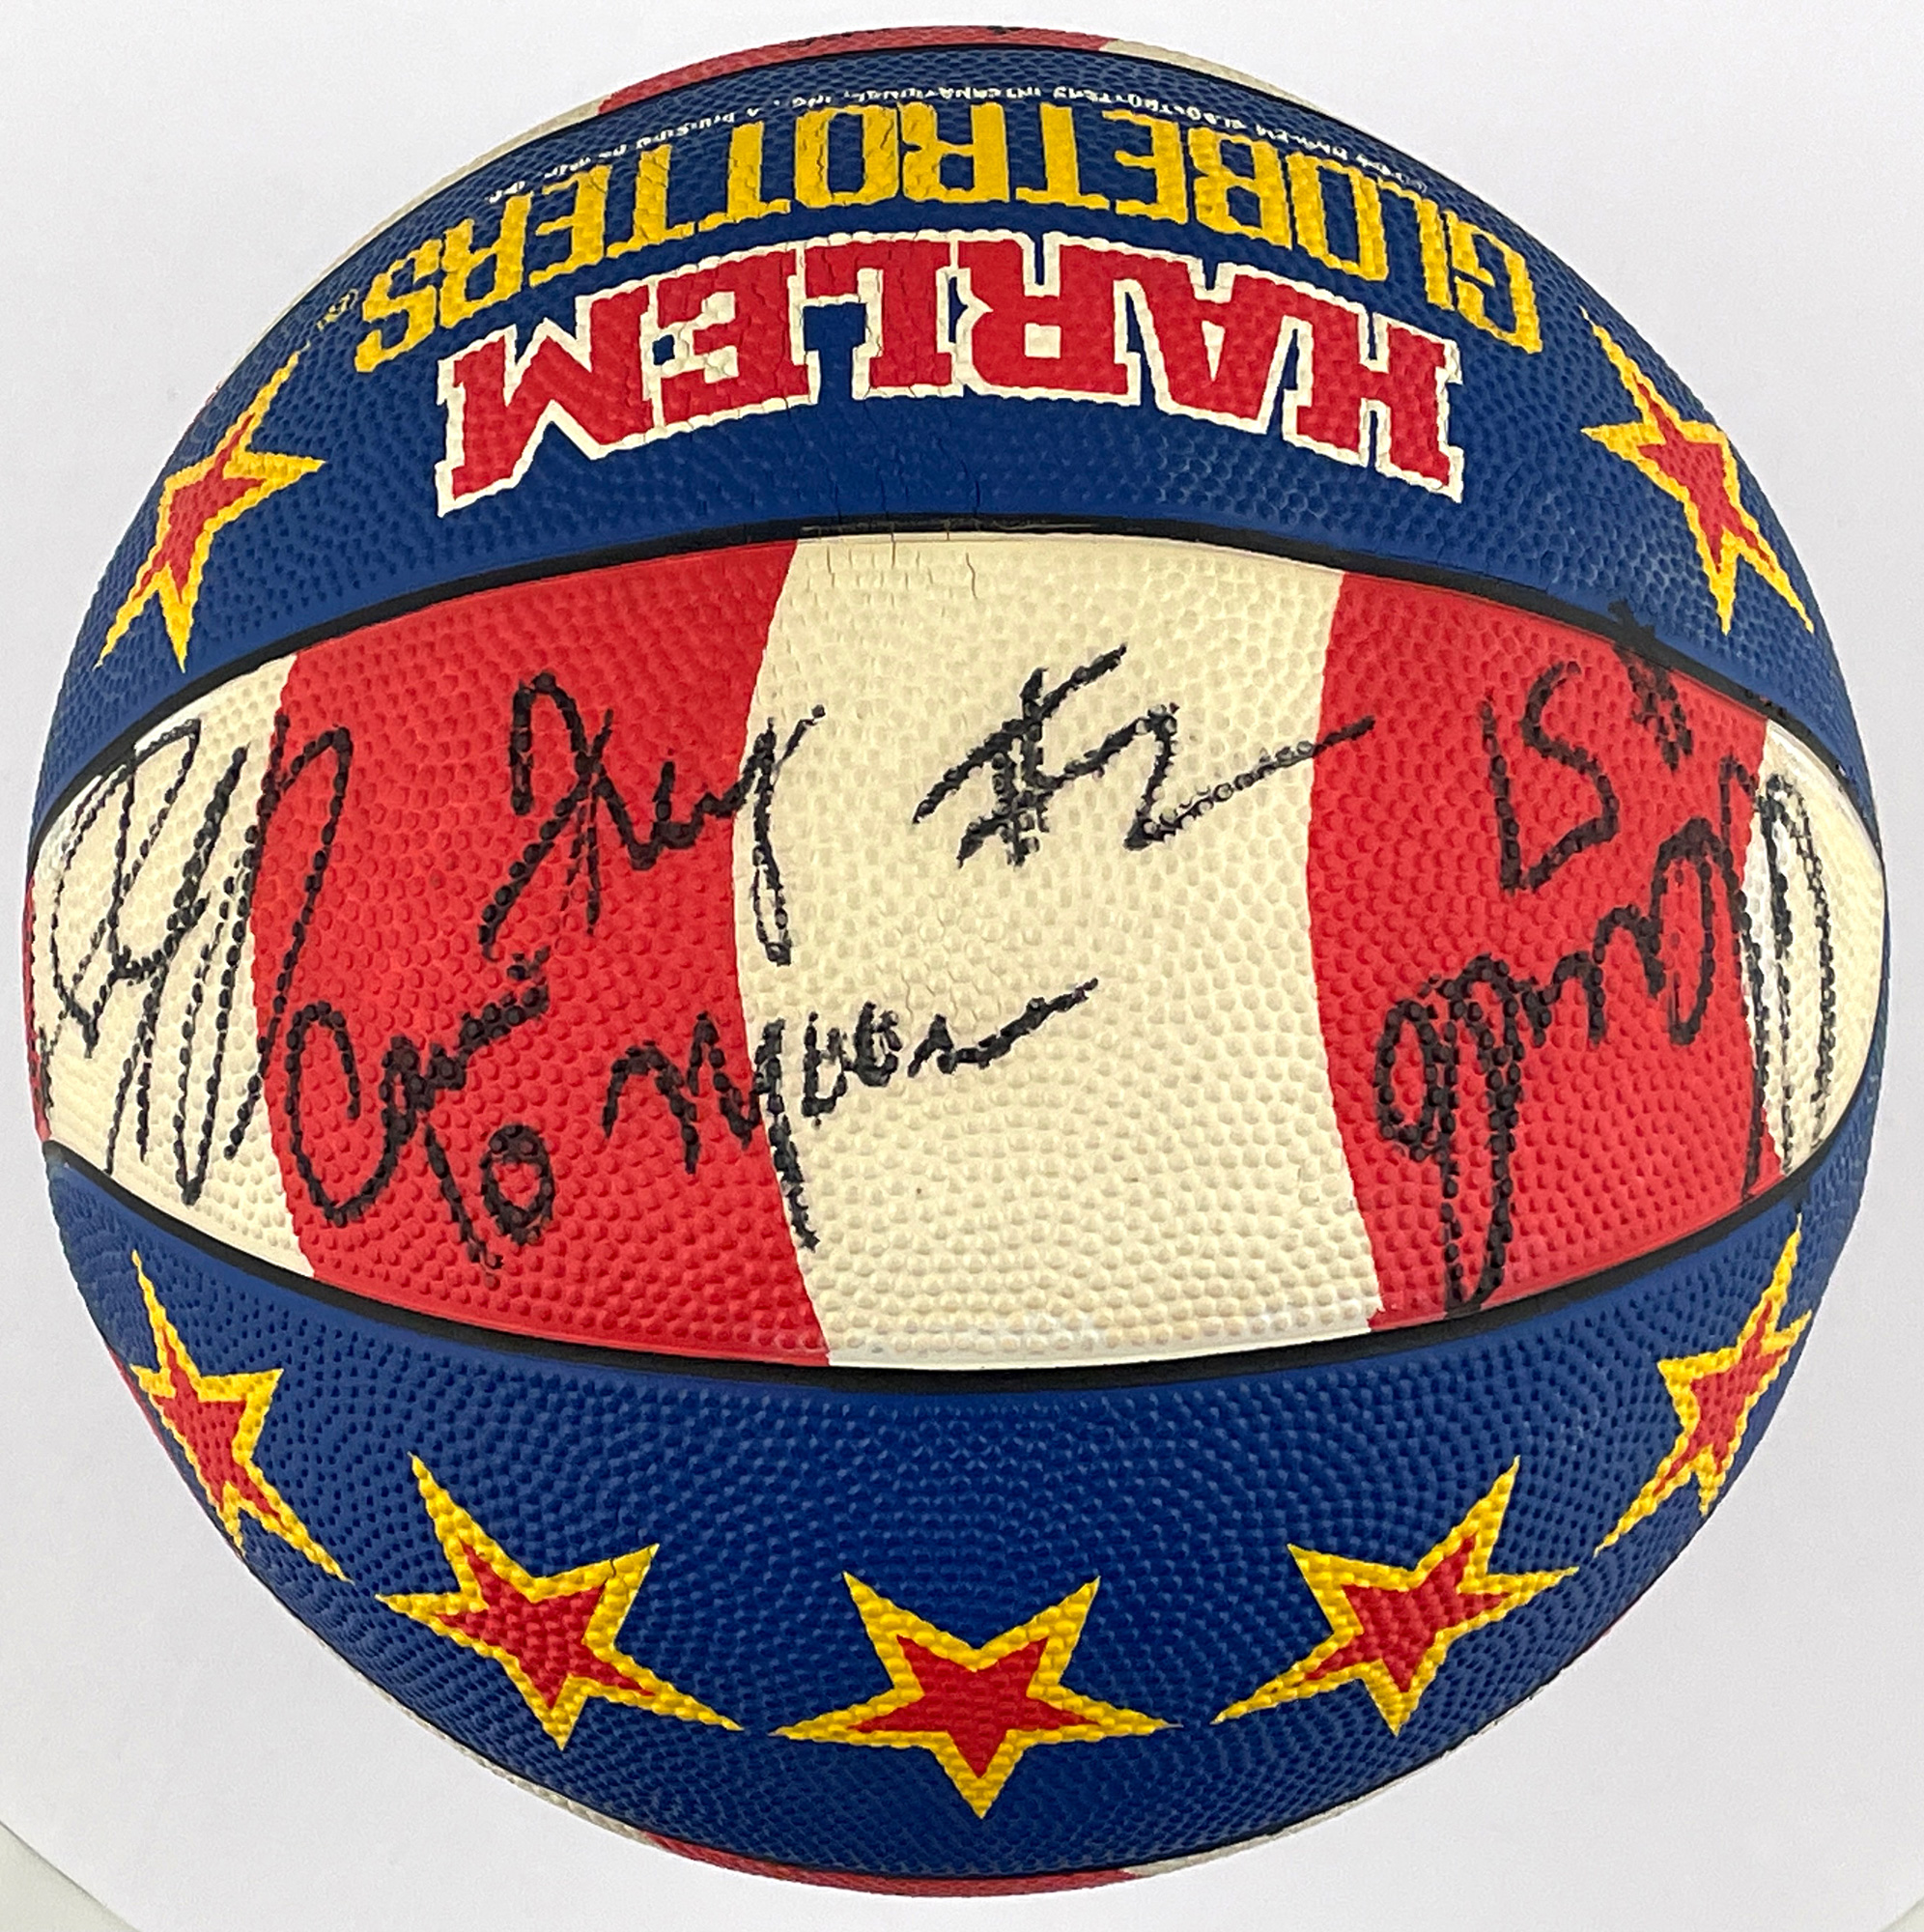 Harlem Globetrotters Ball with 5 signatured